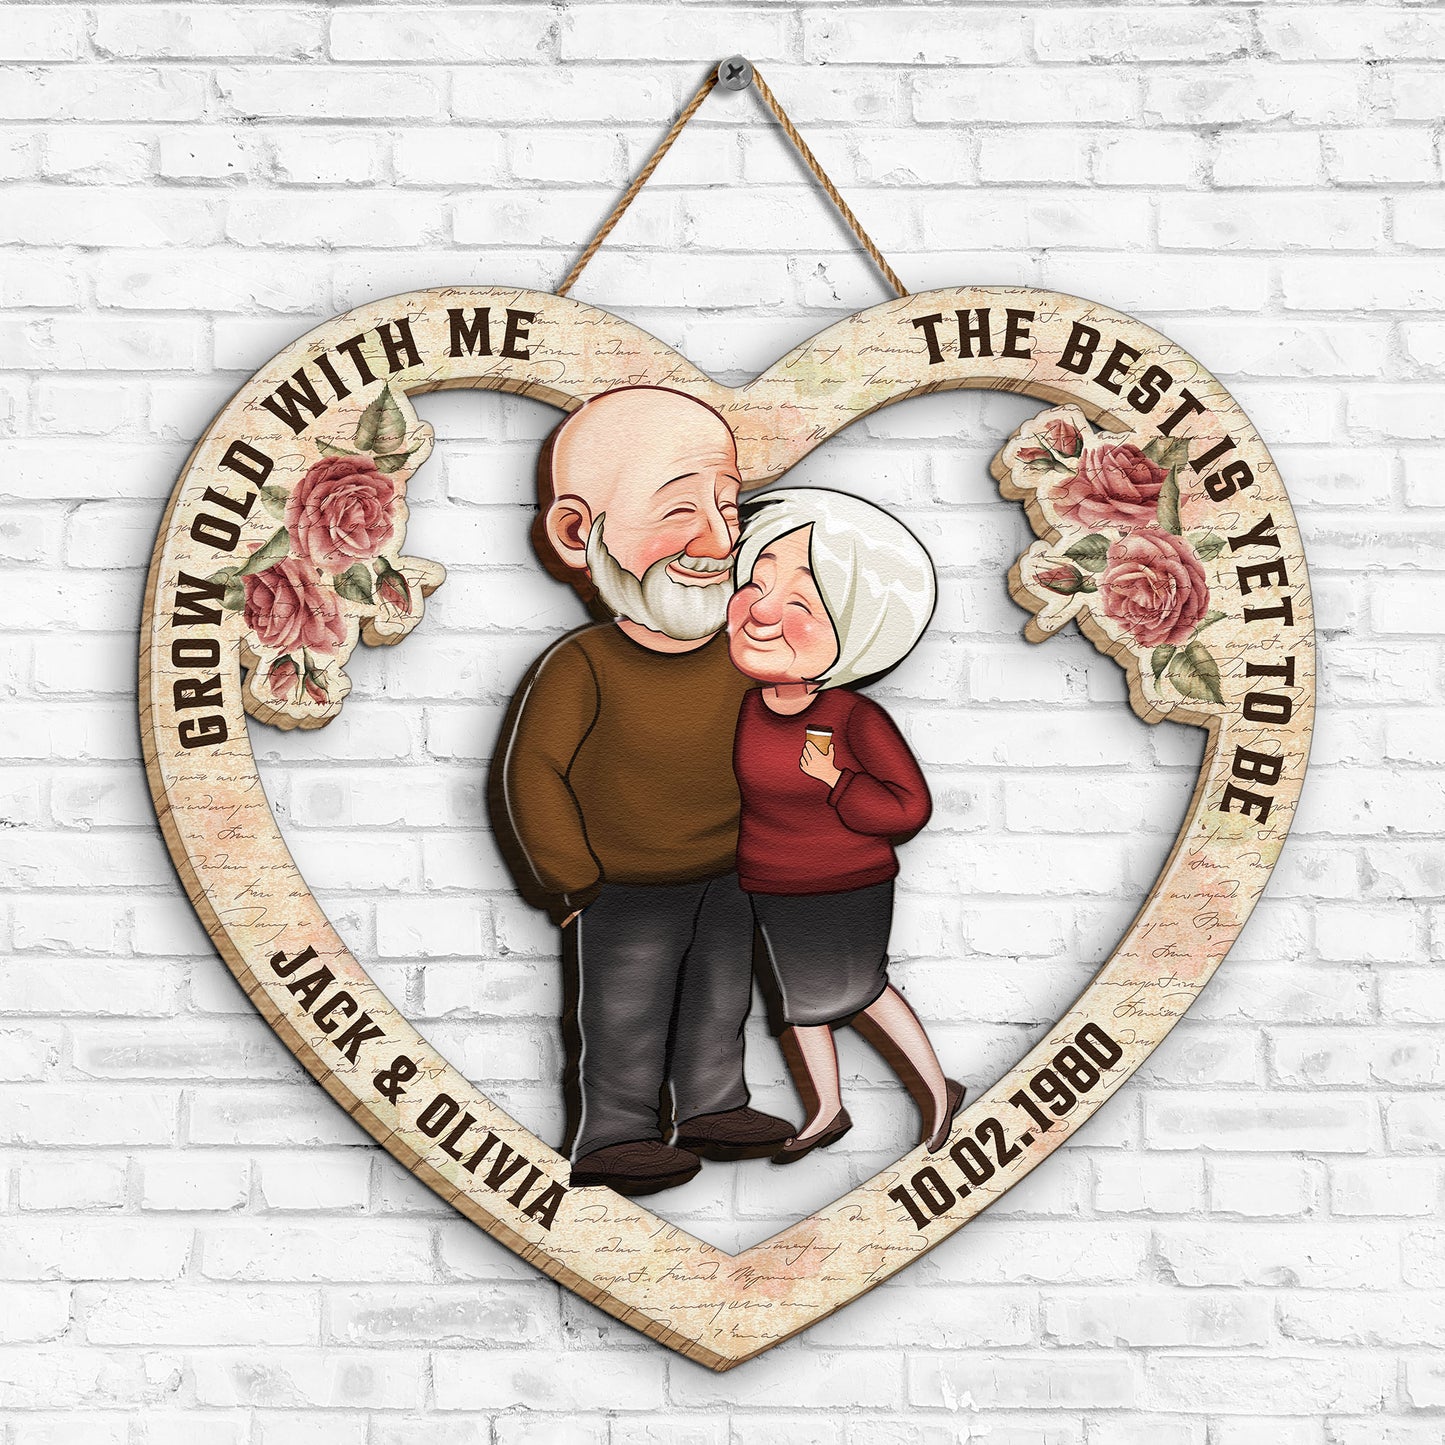 Grow Old With Me Old Couples Anniversary - Personalized Wood Sign